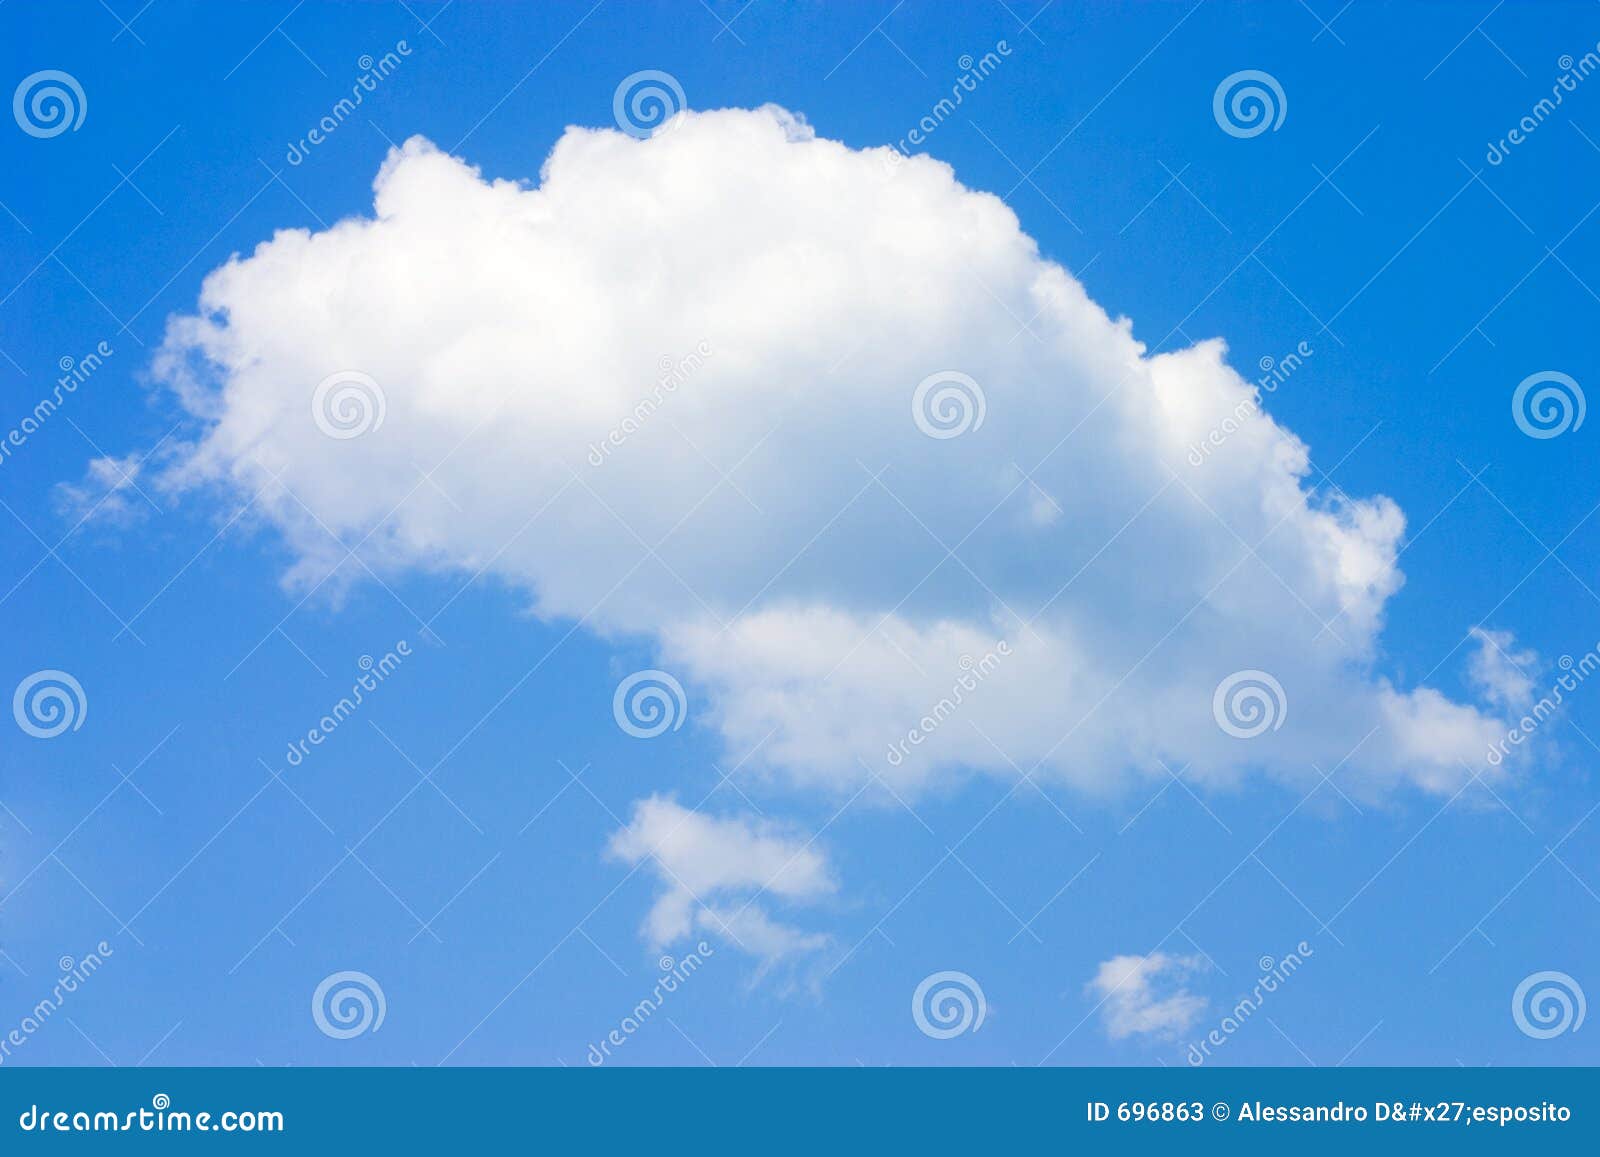 lonely cloud